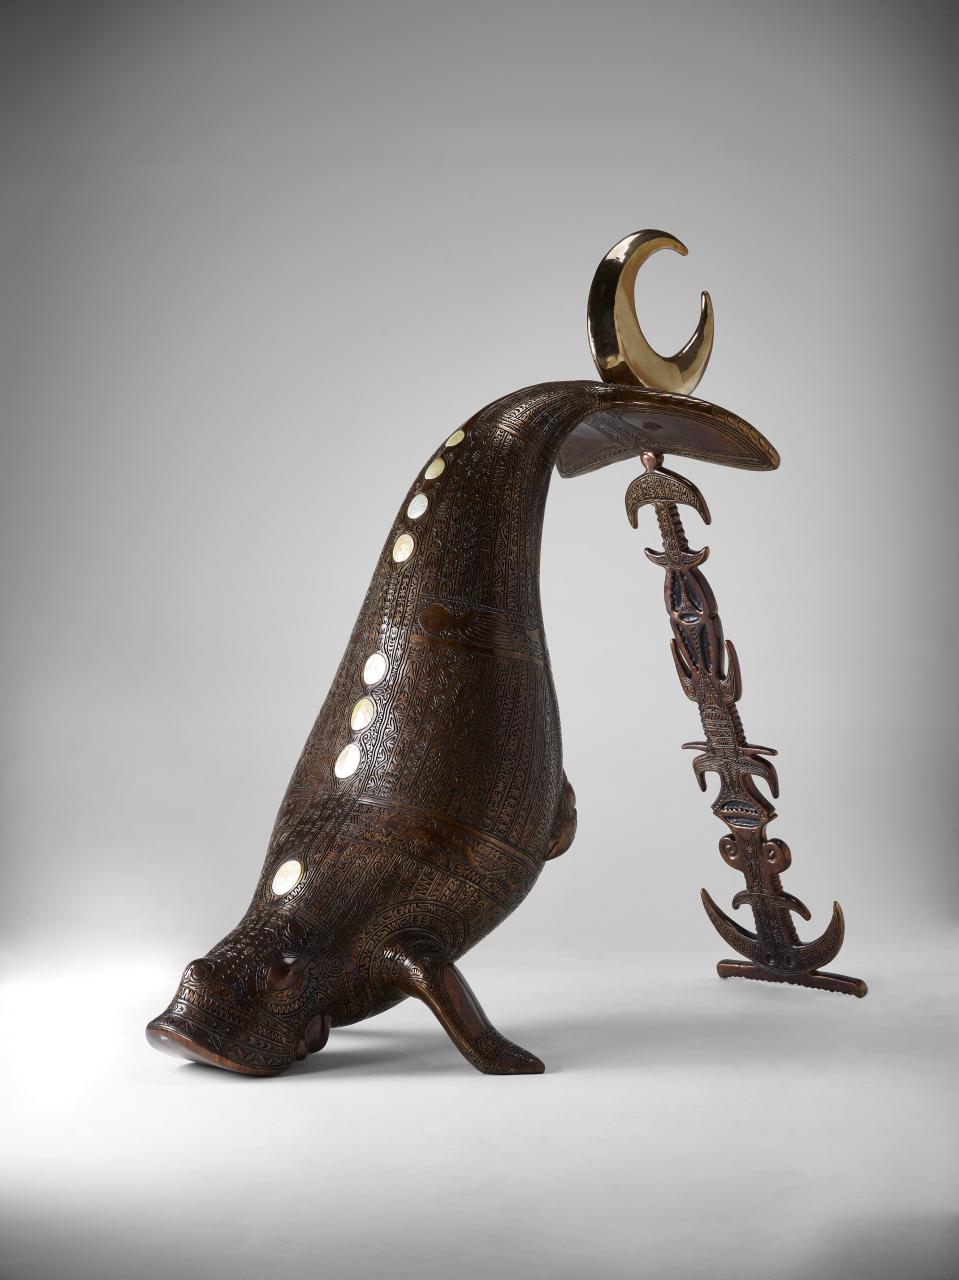 A bronze sculpture in the shape of a Dugong, shown with its tail in the air